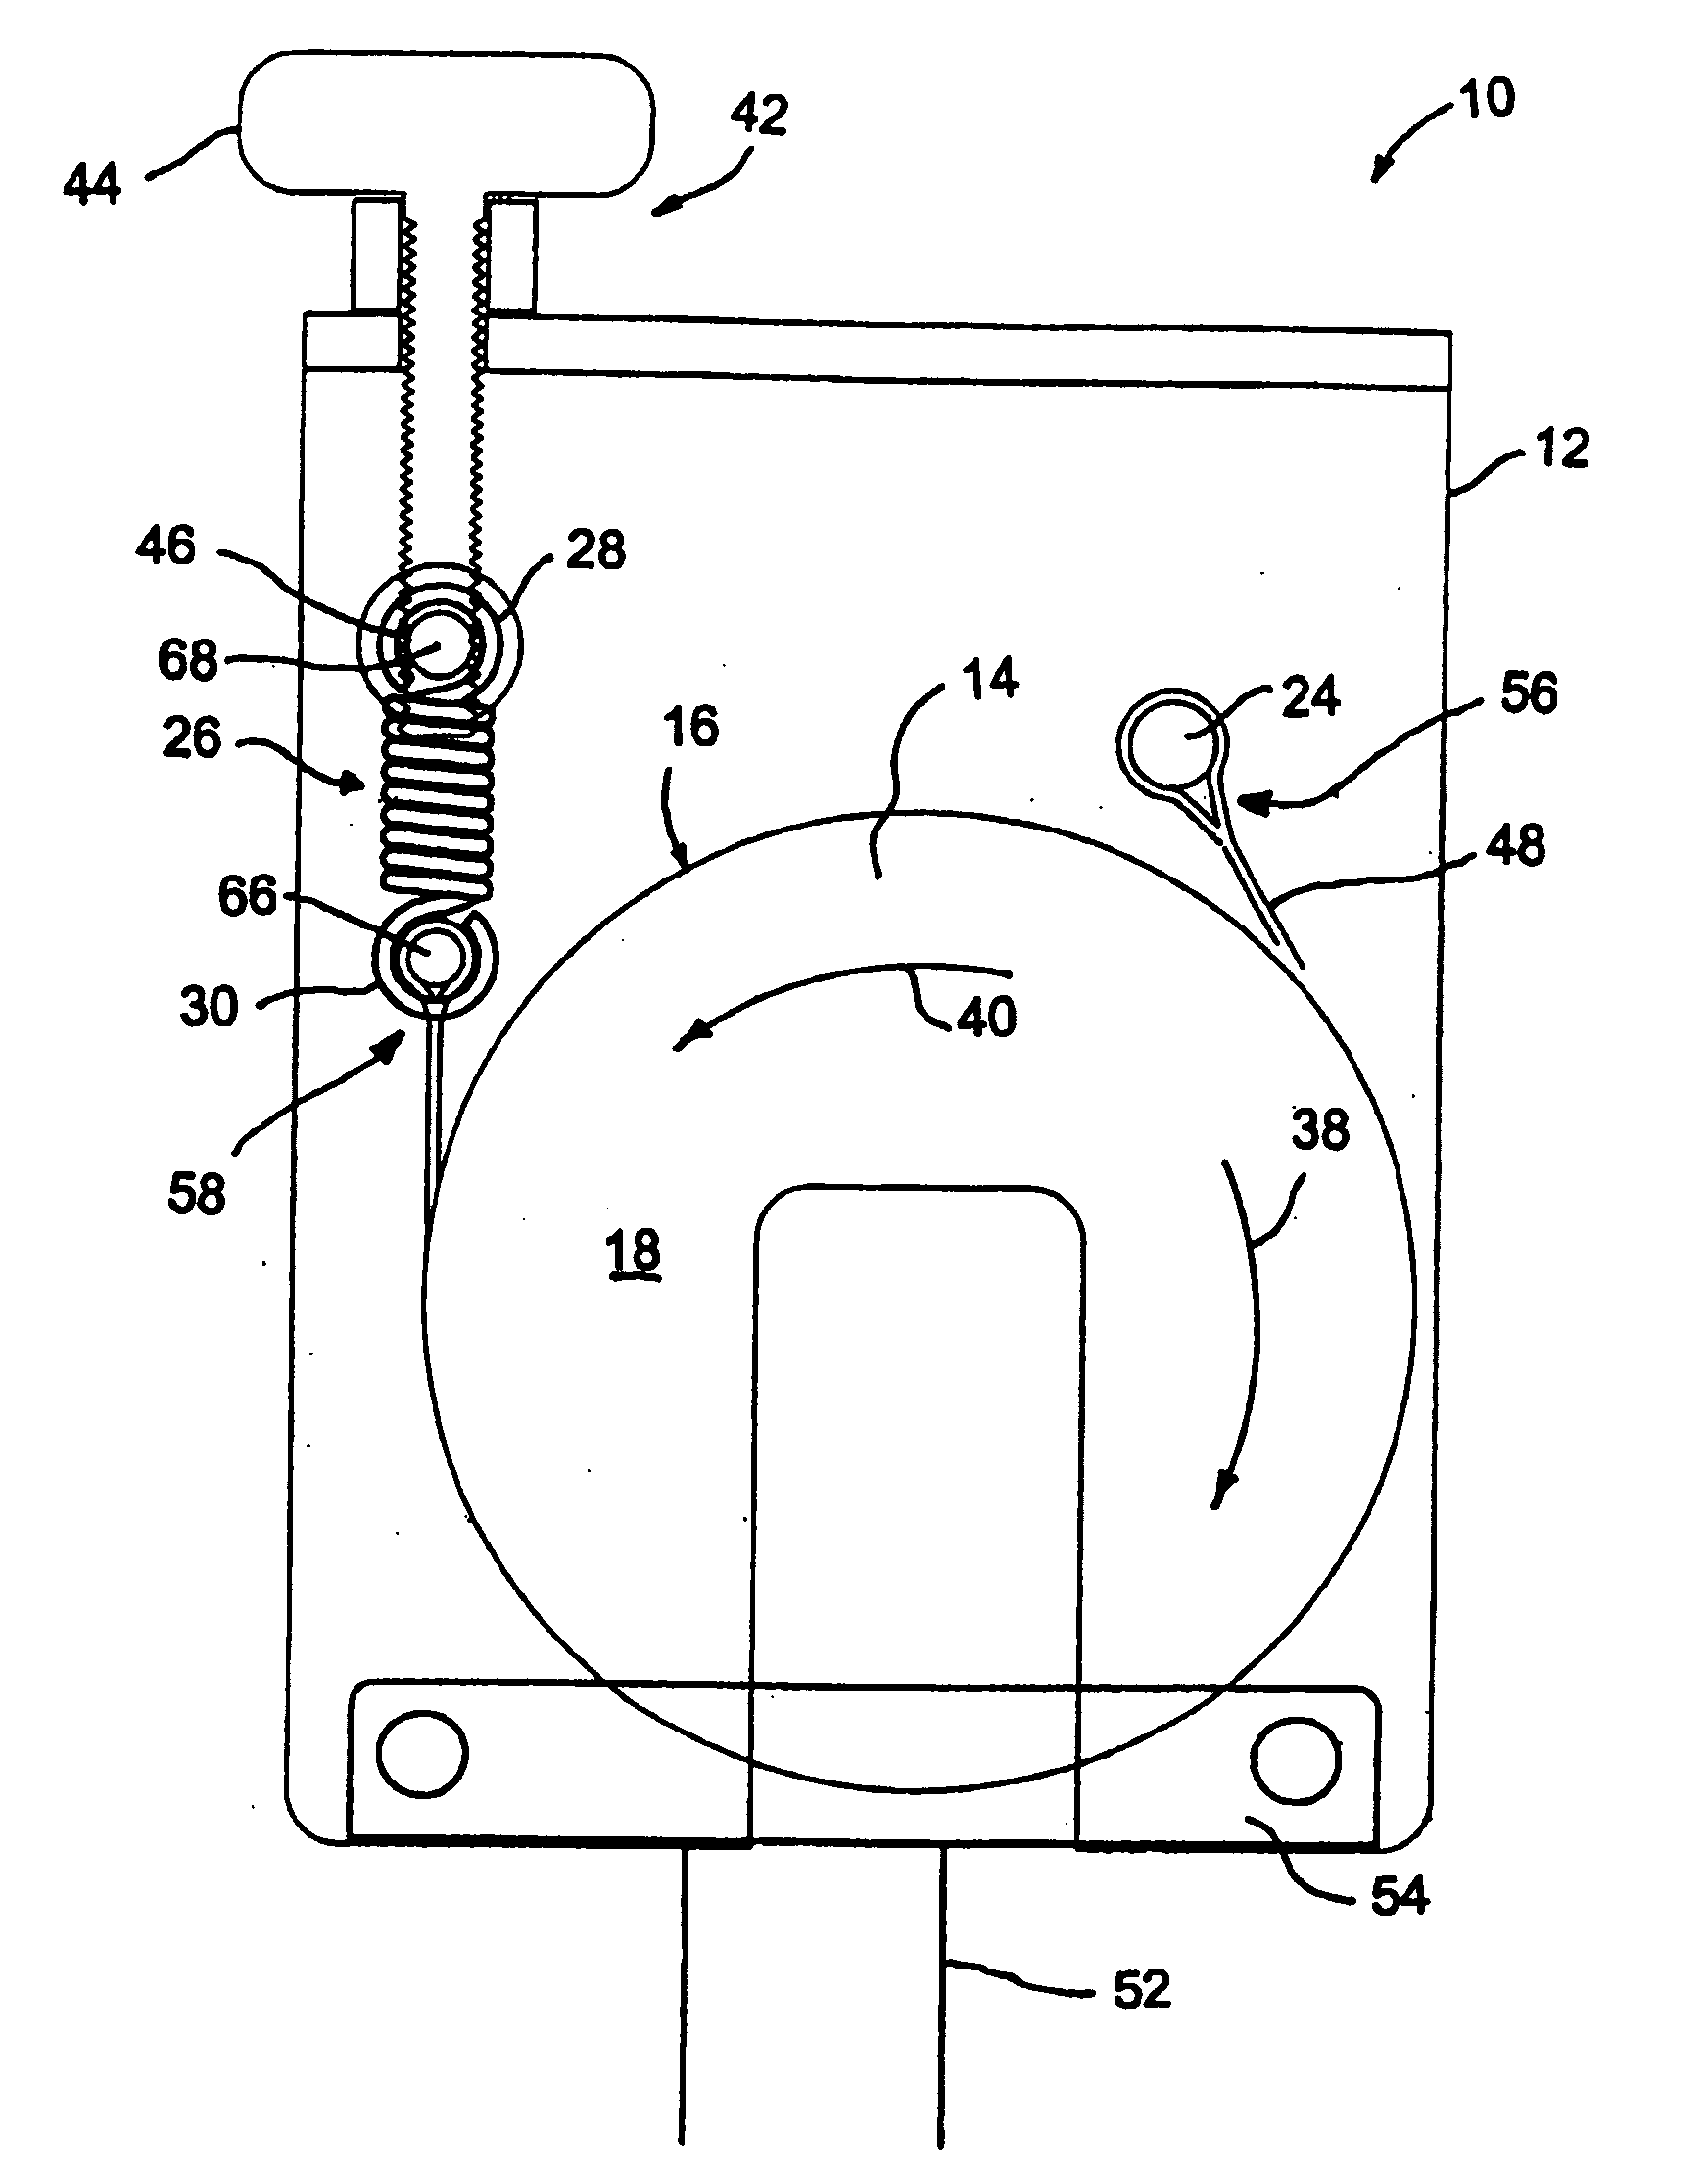 Adjustable linear friction device